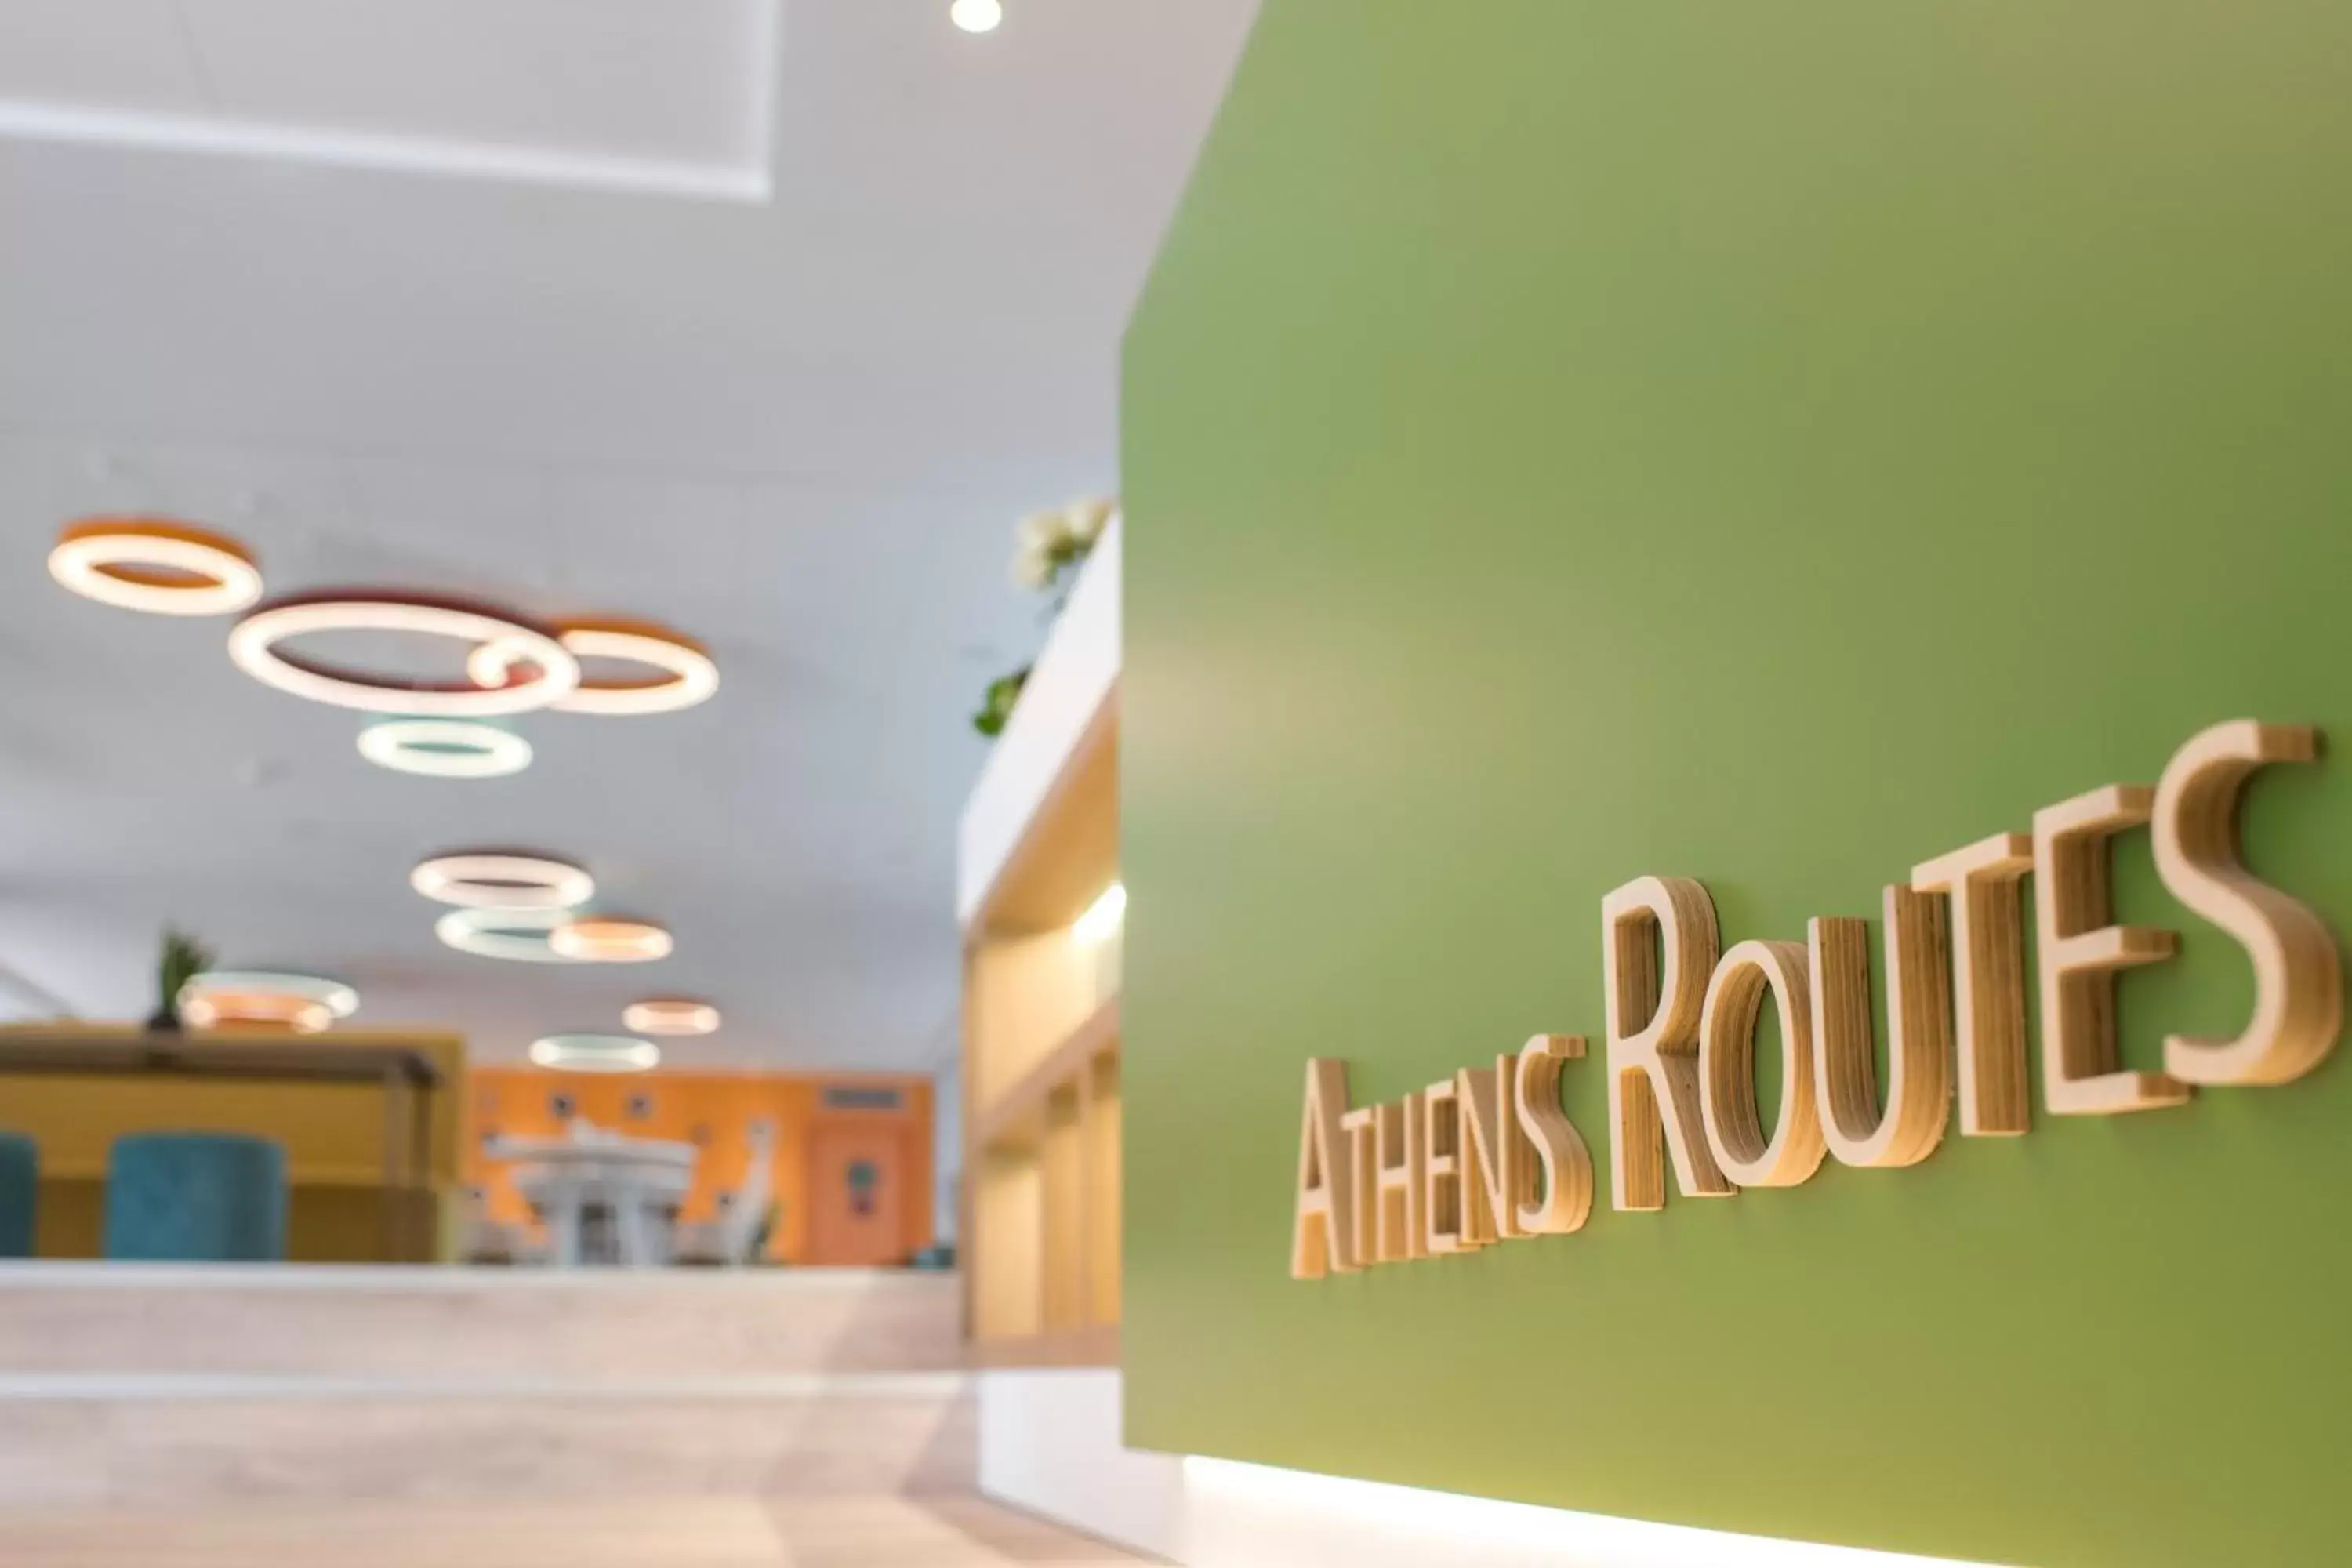 Property logo or sign in ibis Styles Athens Routes